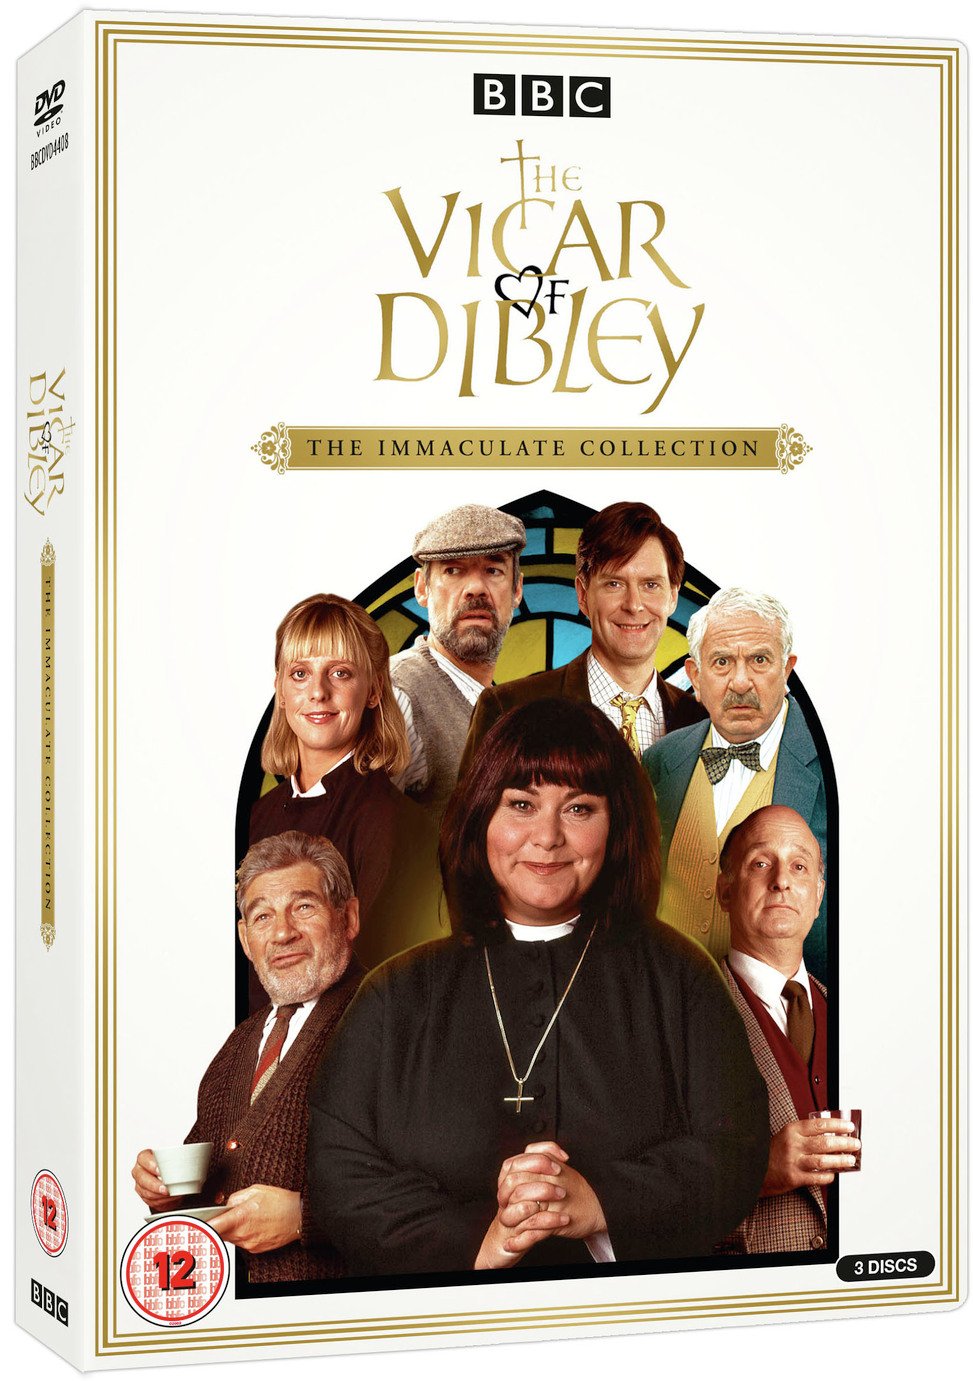 The Vicar of Dibley: The Immaculate Collection DVD Box Set